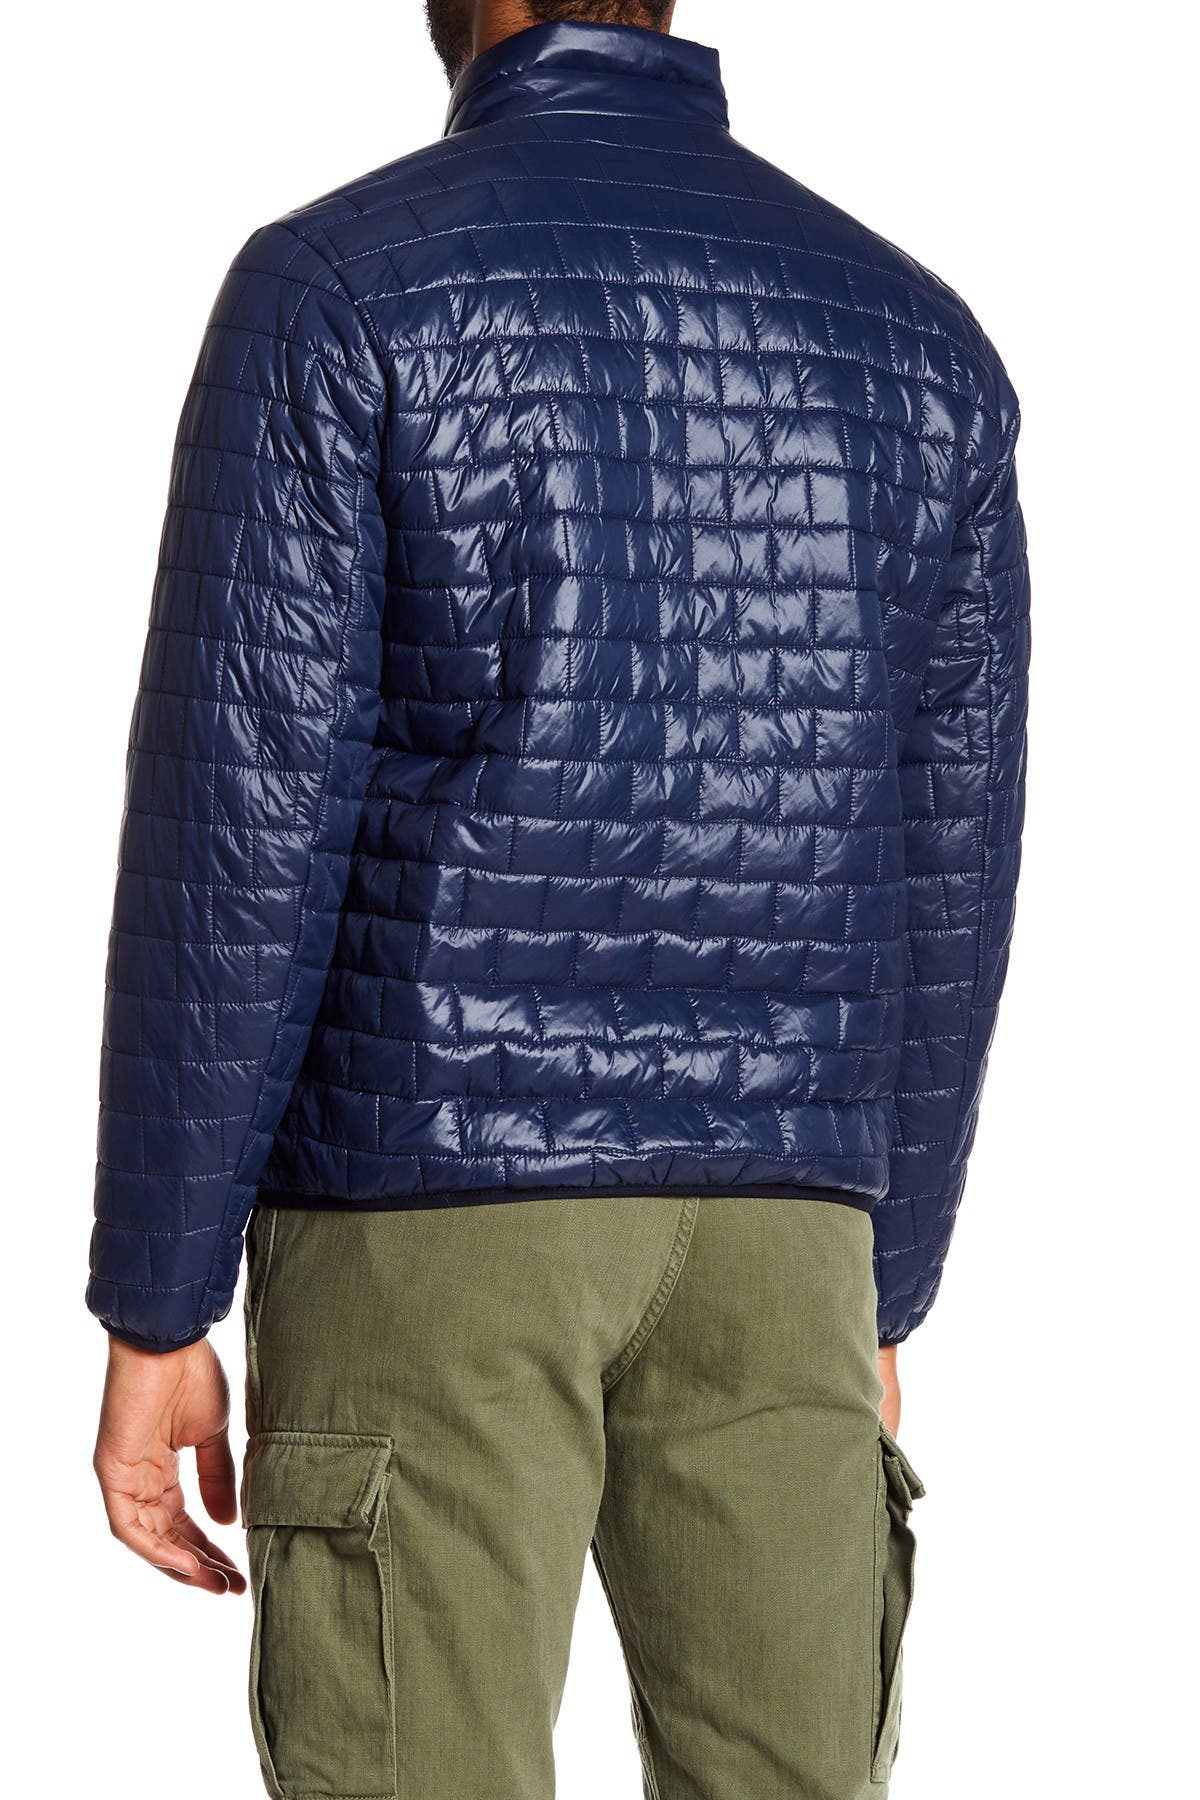 tommy hilfiger box quilted packable puffer jacket